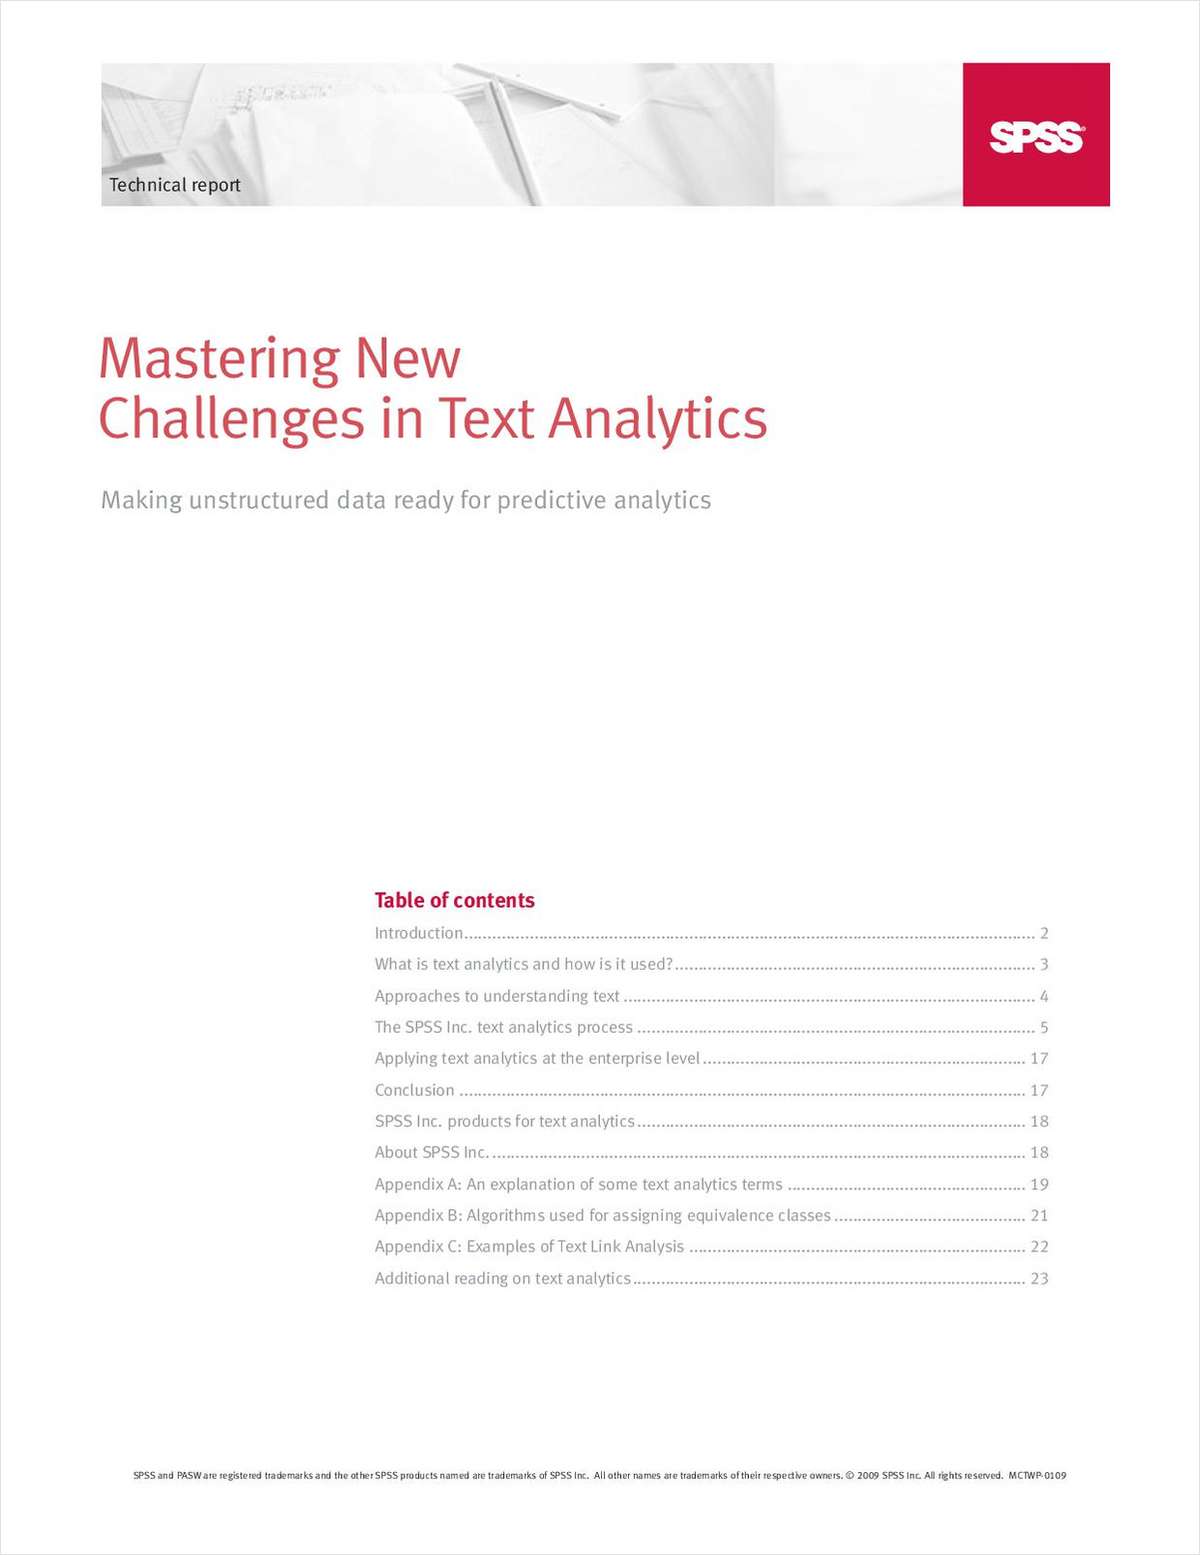 Mastering New Challenges in Text Analytics